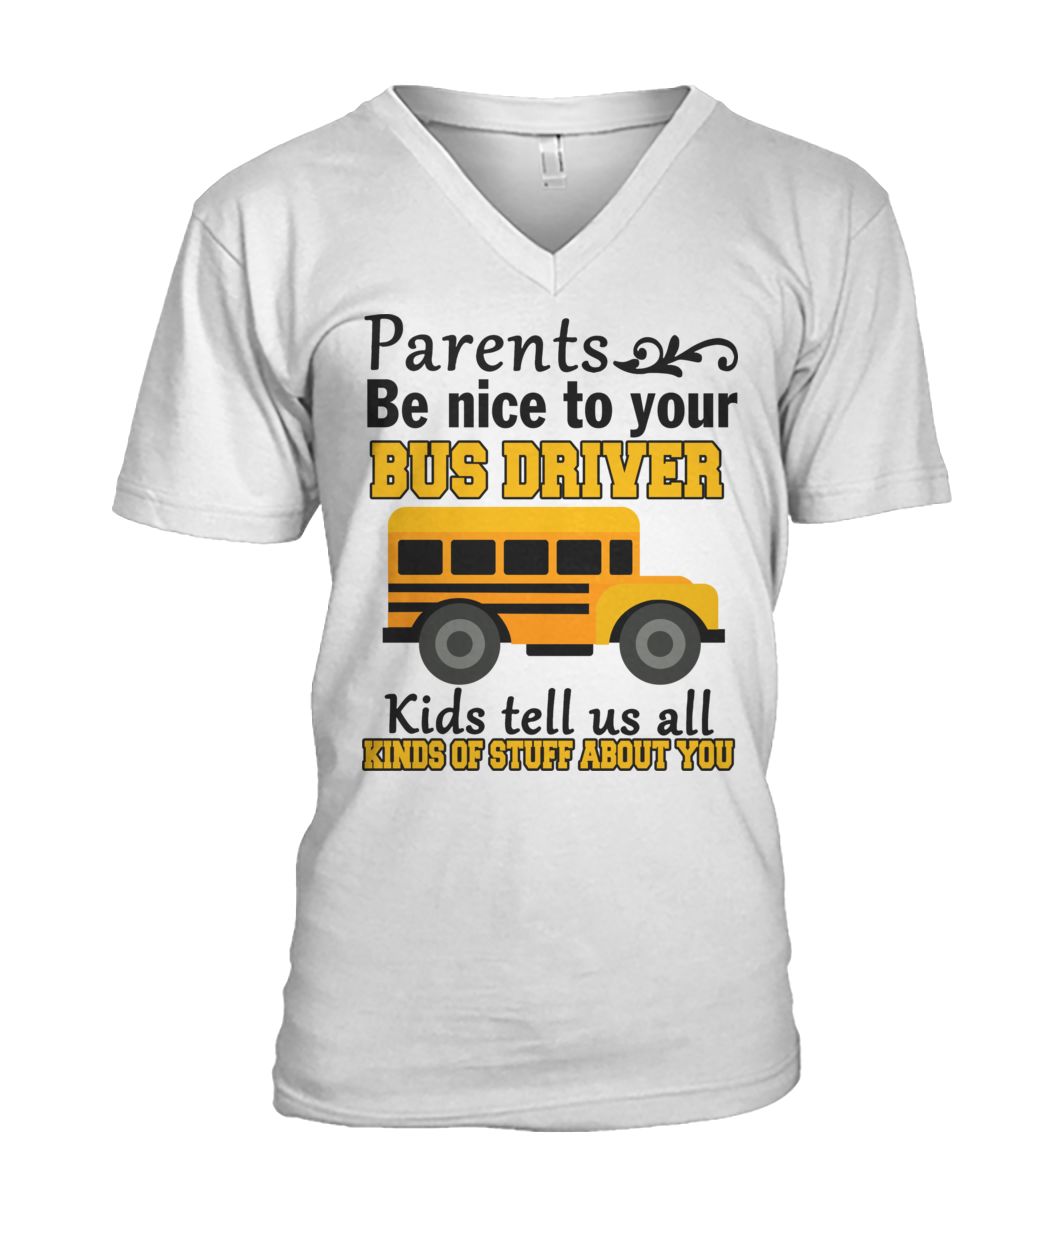 Parents be nice to the bus driver kids tell us all kind of stuff about you mens v-neck